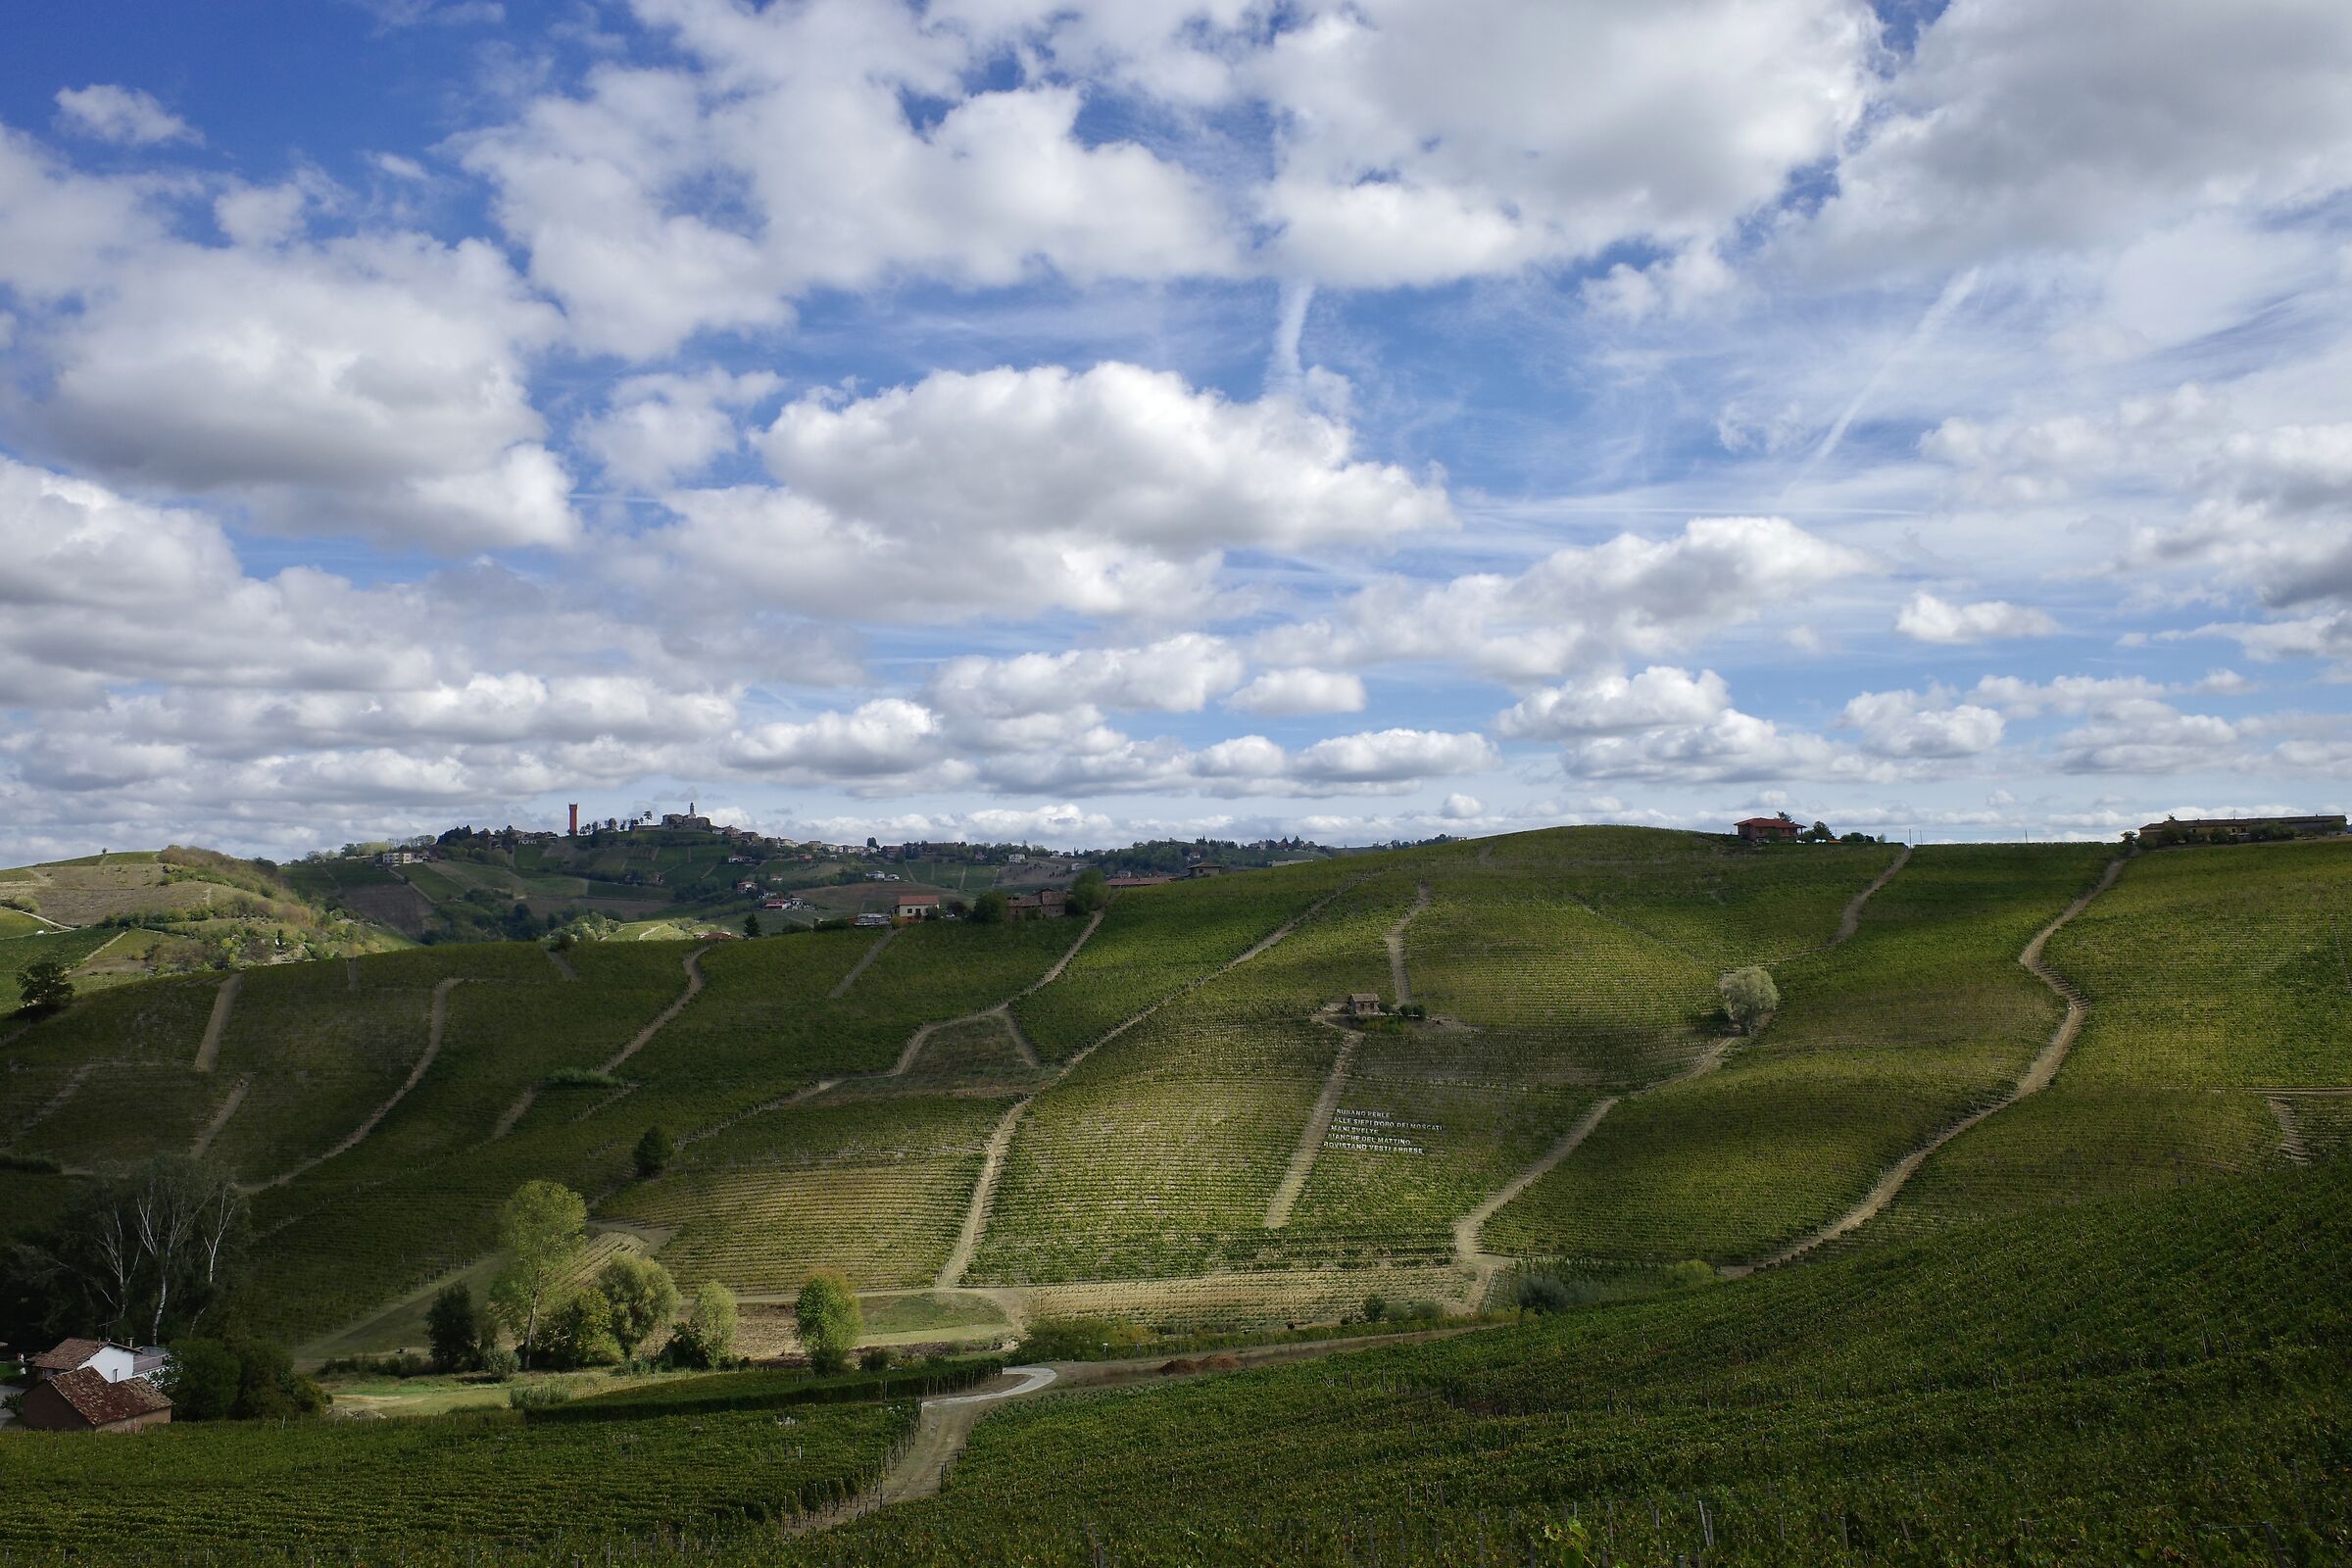 Vineyards and poems...